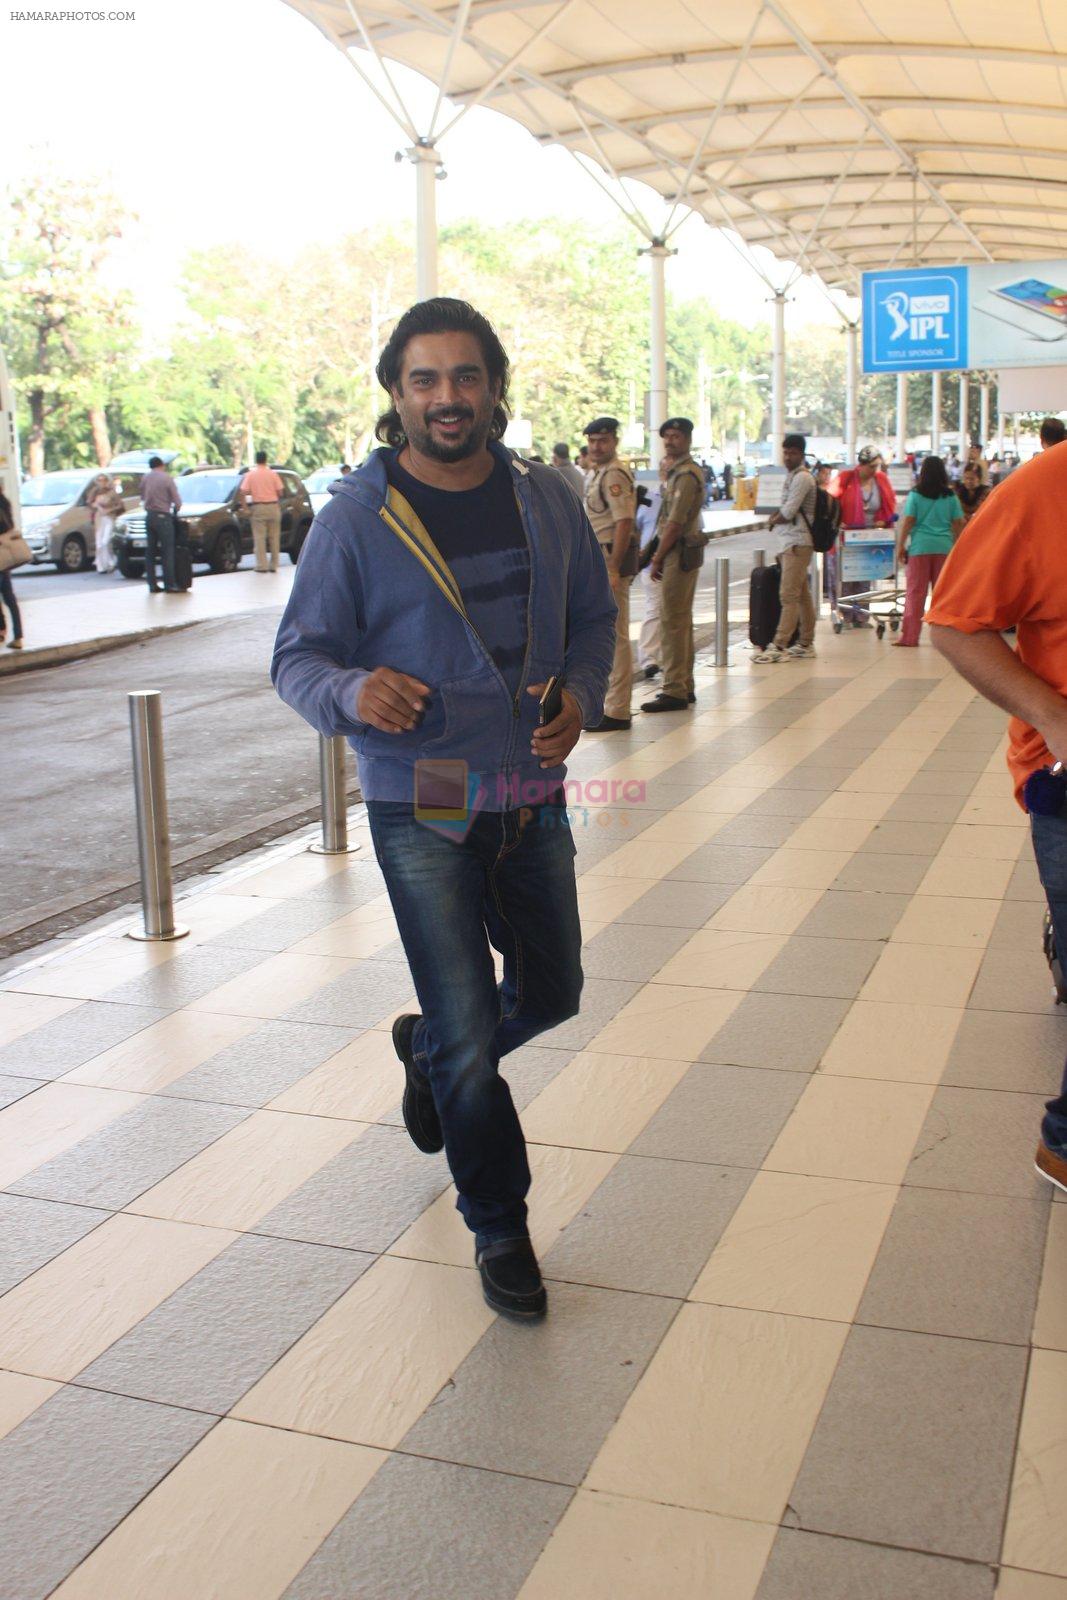 Madhavan snapped at airport on 7th Feb 2016